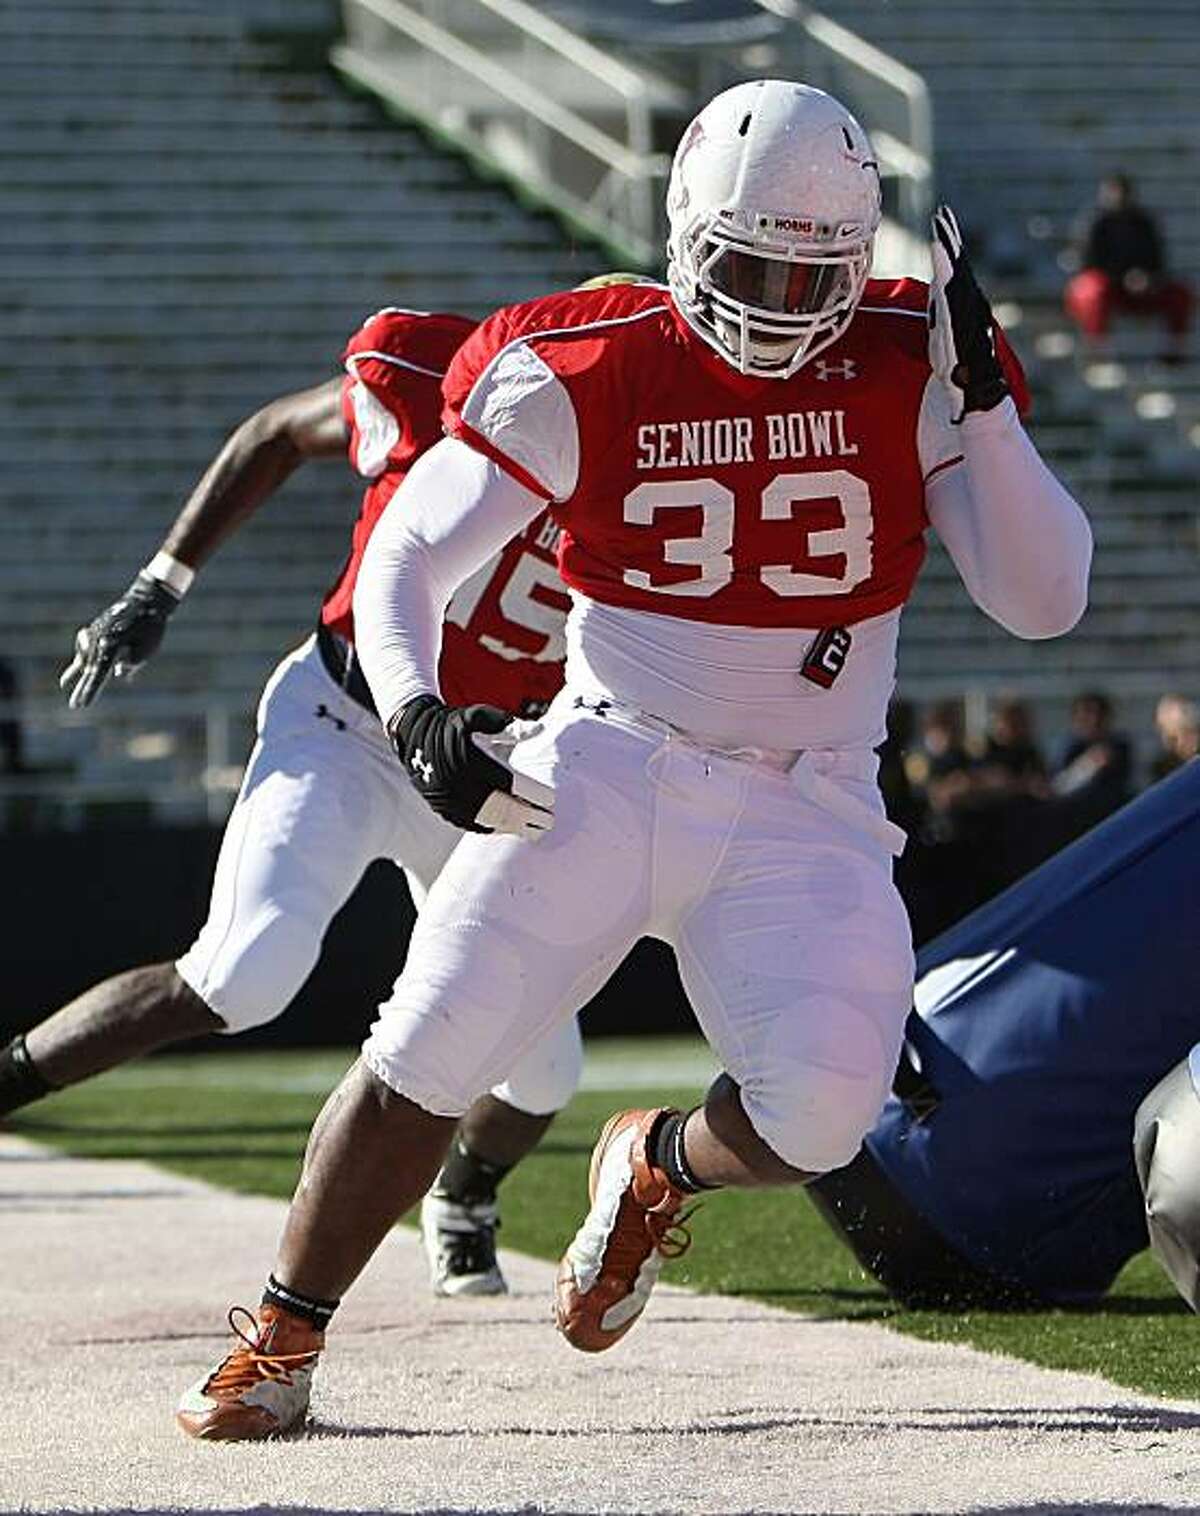 Lamarr Houston during practice for the 2010 Under Armour Senior Bowl at Ladd Peebles Stadium in Mobile, Alabama on January 27, 2010. (AP Photo/Ben Liebenberg)